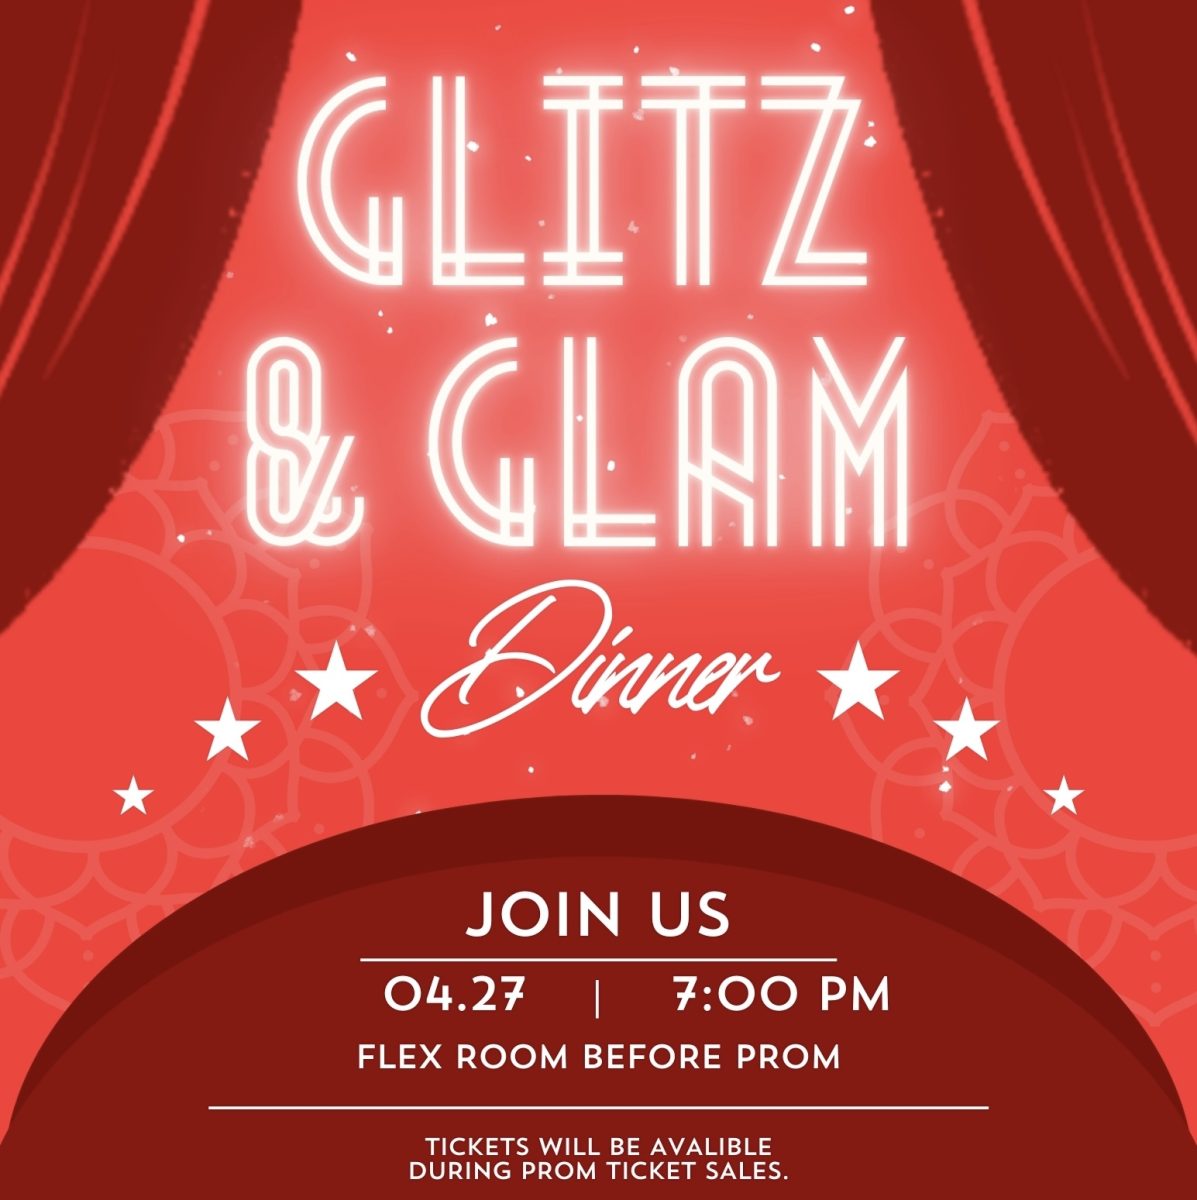 Glitz+and+Glamor+pre-prom+dinner+to+be+held+at+school